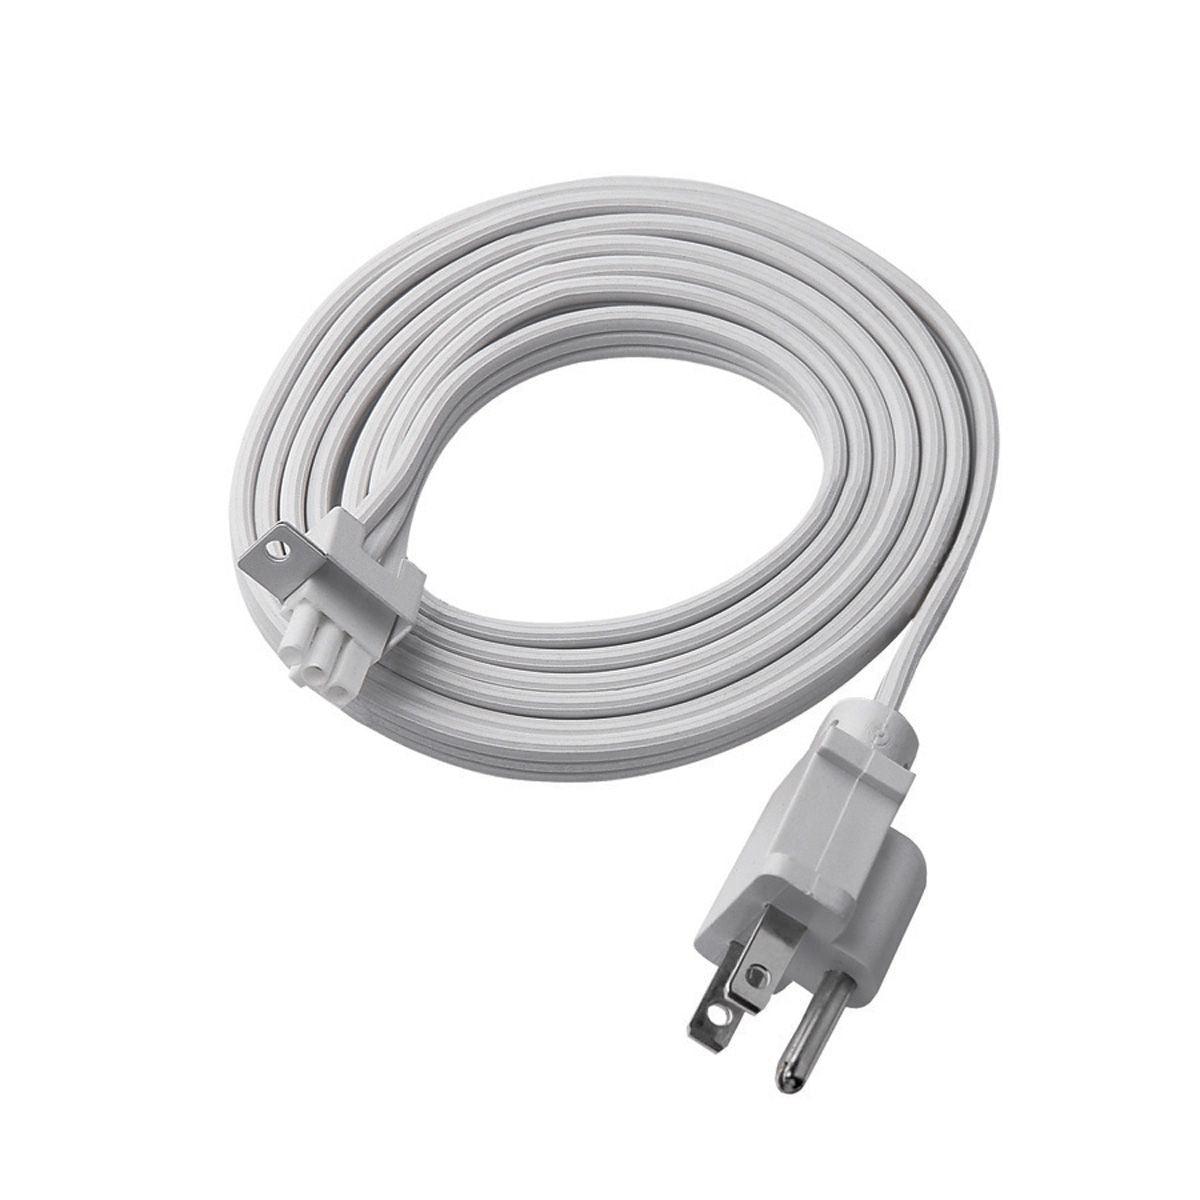 6ft Grounded Plug-in Power Cord For Undercabinet Lights, White Finish